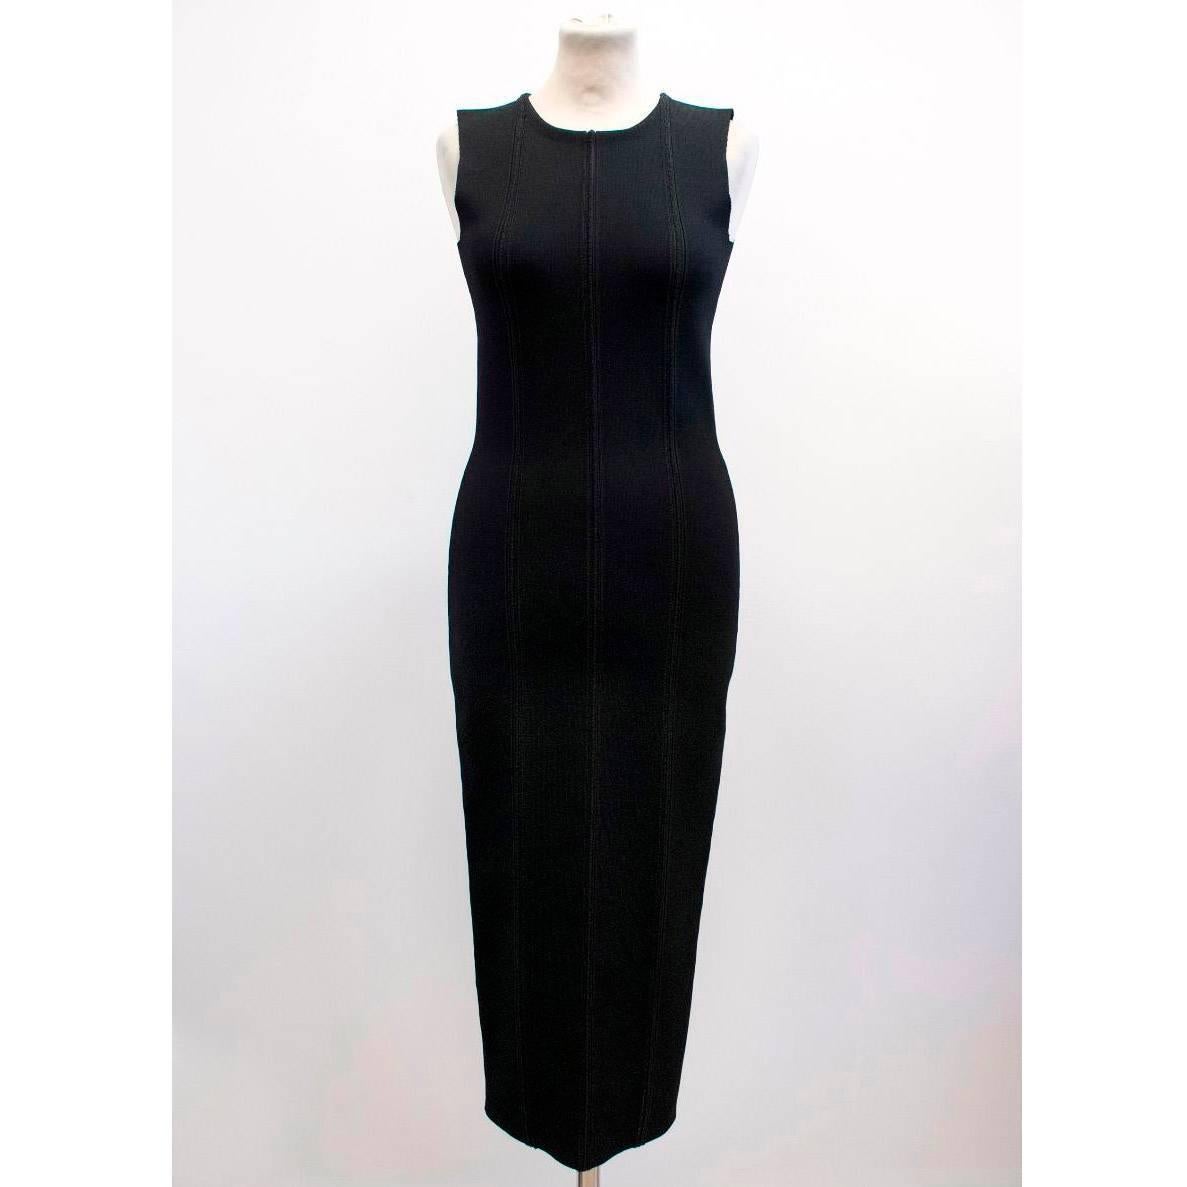 Victoria Beckham black midi dress in fitted sleeveless style featuring a decorative centre back exposed zip.

Size: US 0-2
Measurements: Approx. Bust: 36cm Waist: 34cm Length: 119cm
Condition: 10/10 

* Please note, these items are pre-owned and may